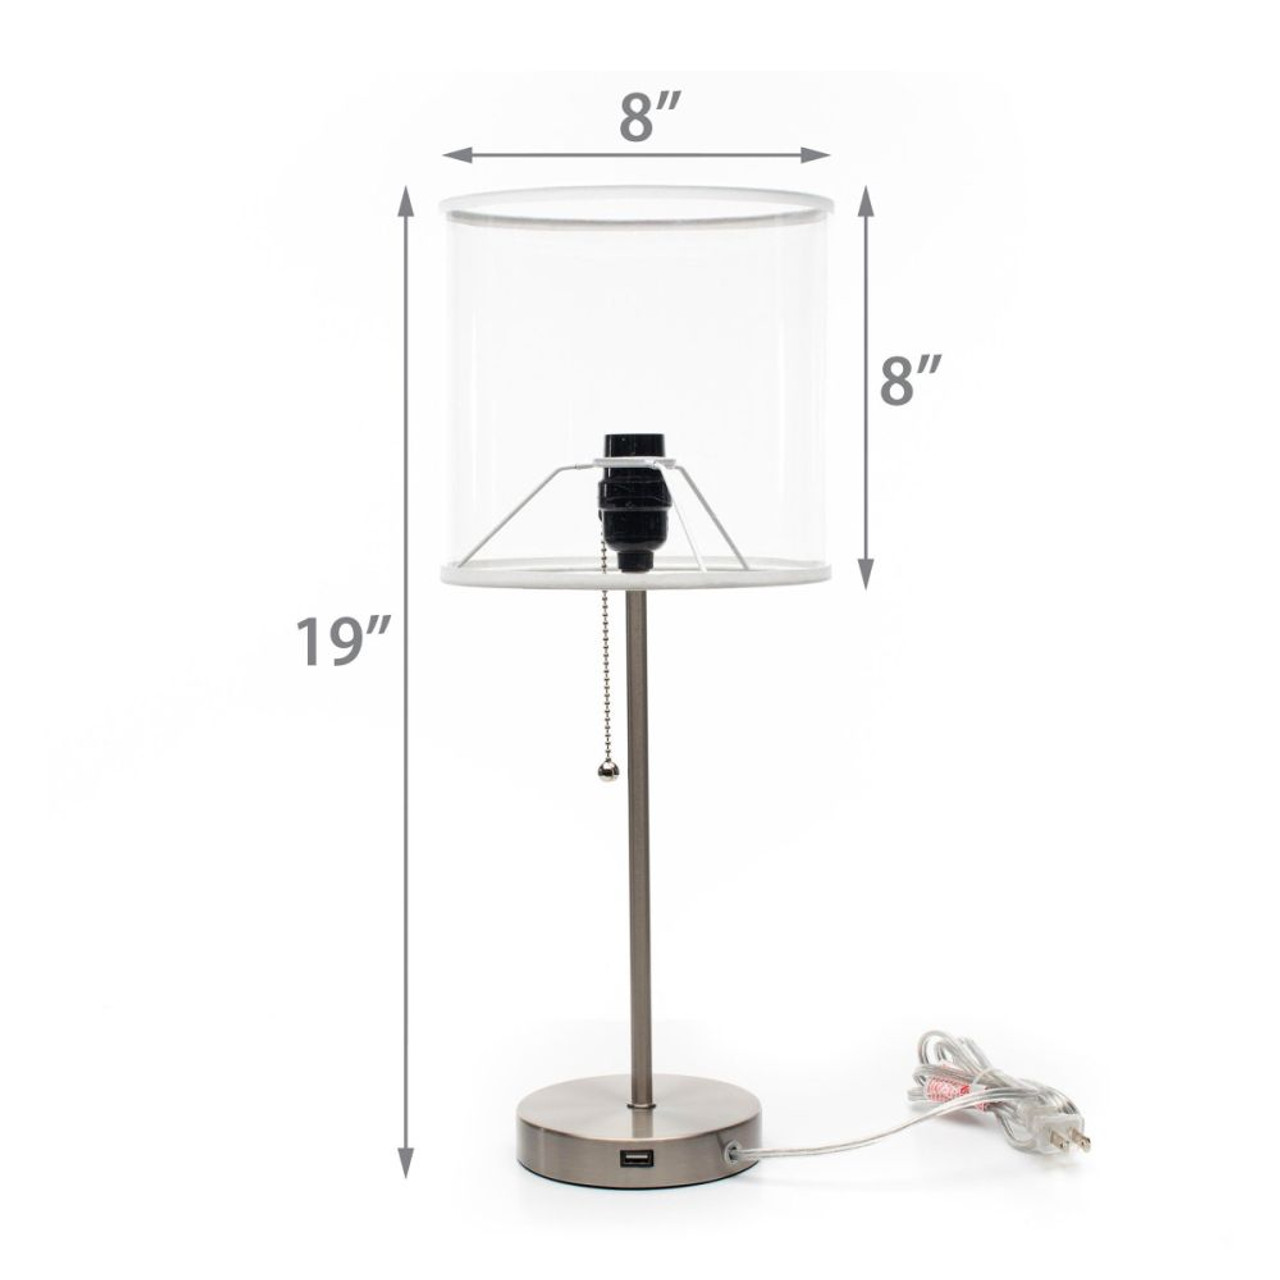 Cleveland Browns 19" Tall Chrome Table Lamp